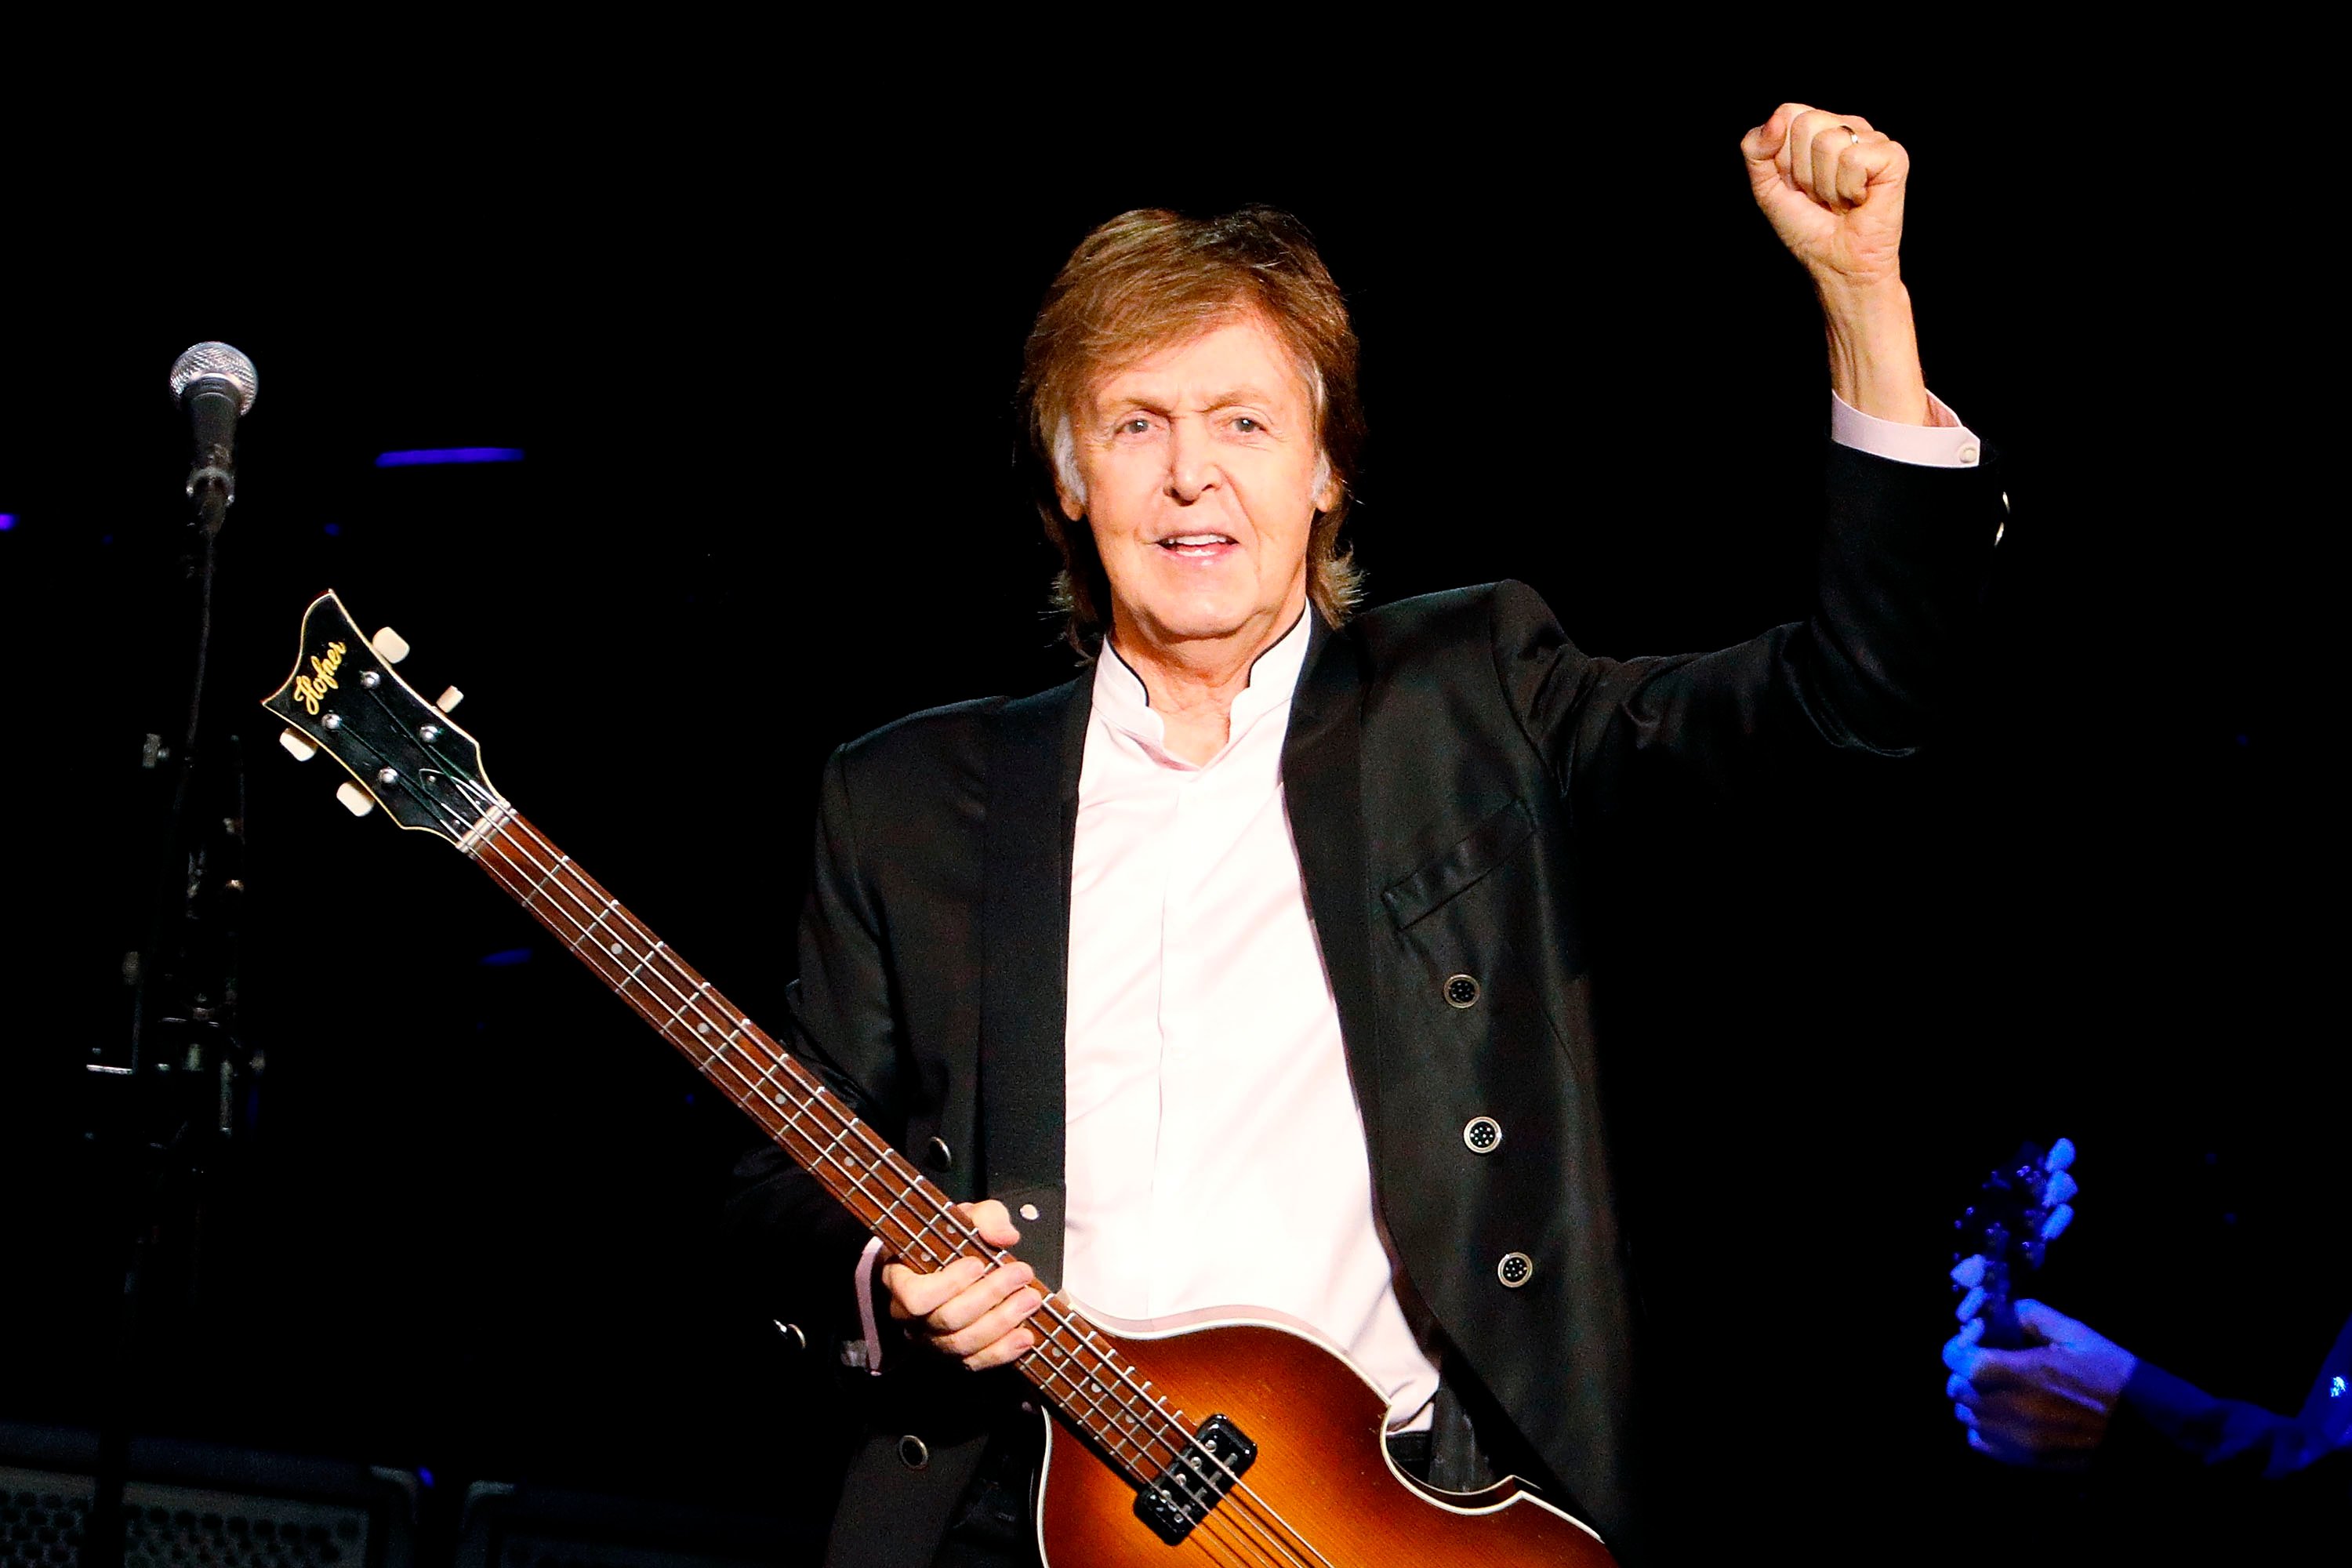 Paul McCartney performs in the U.S. at Barclays Center in New York City